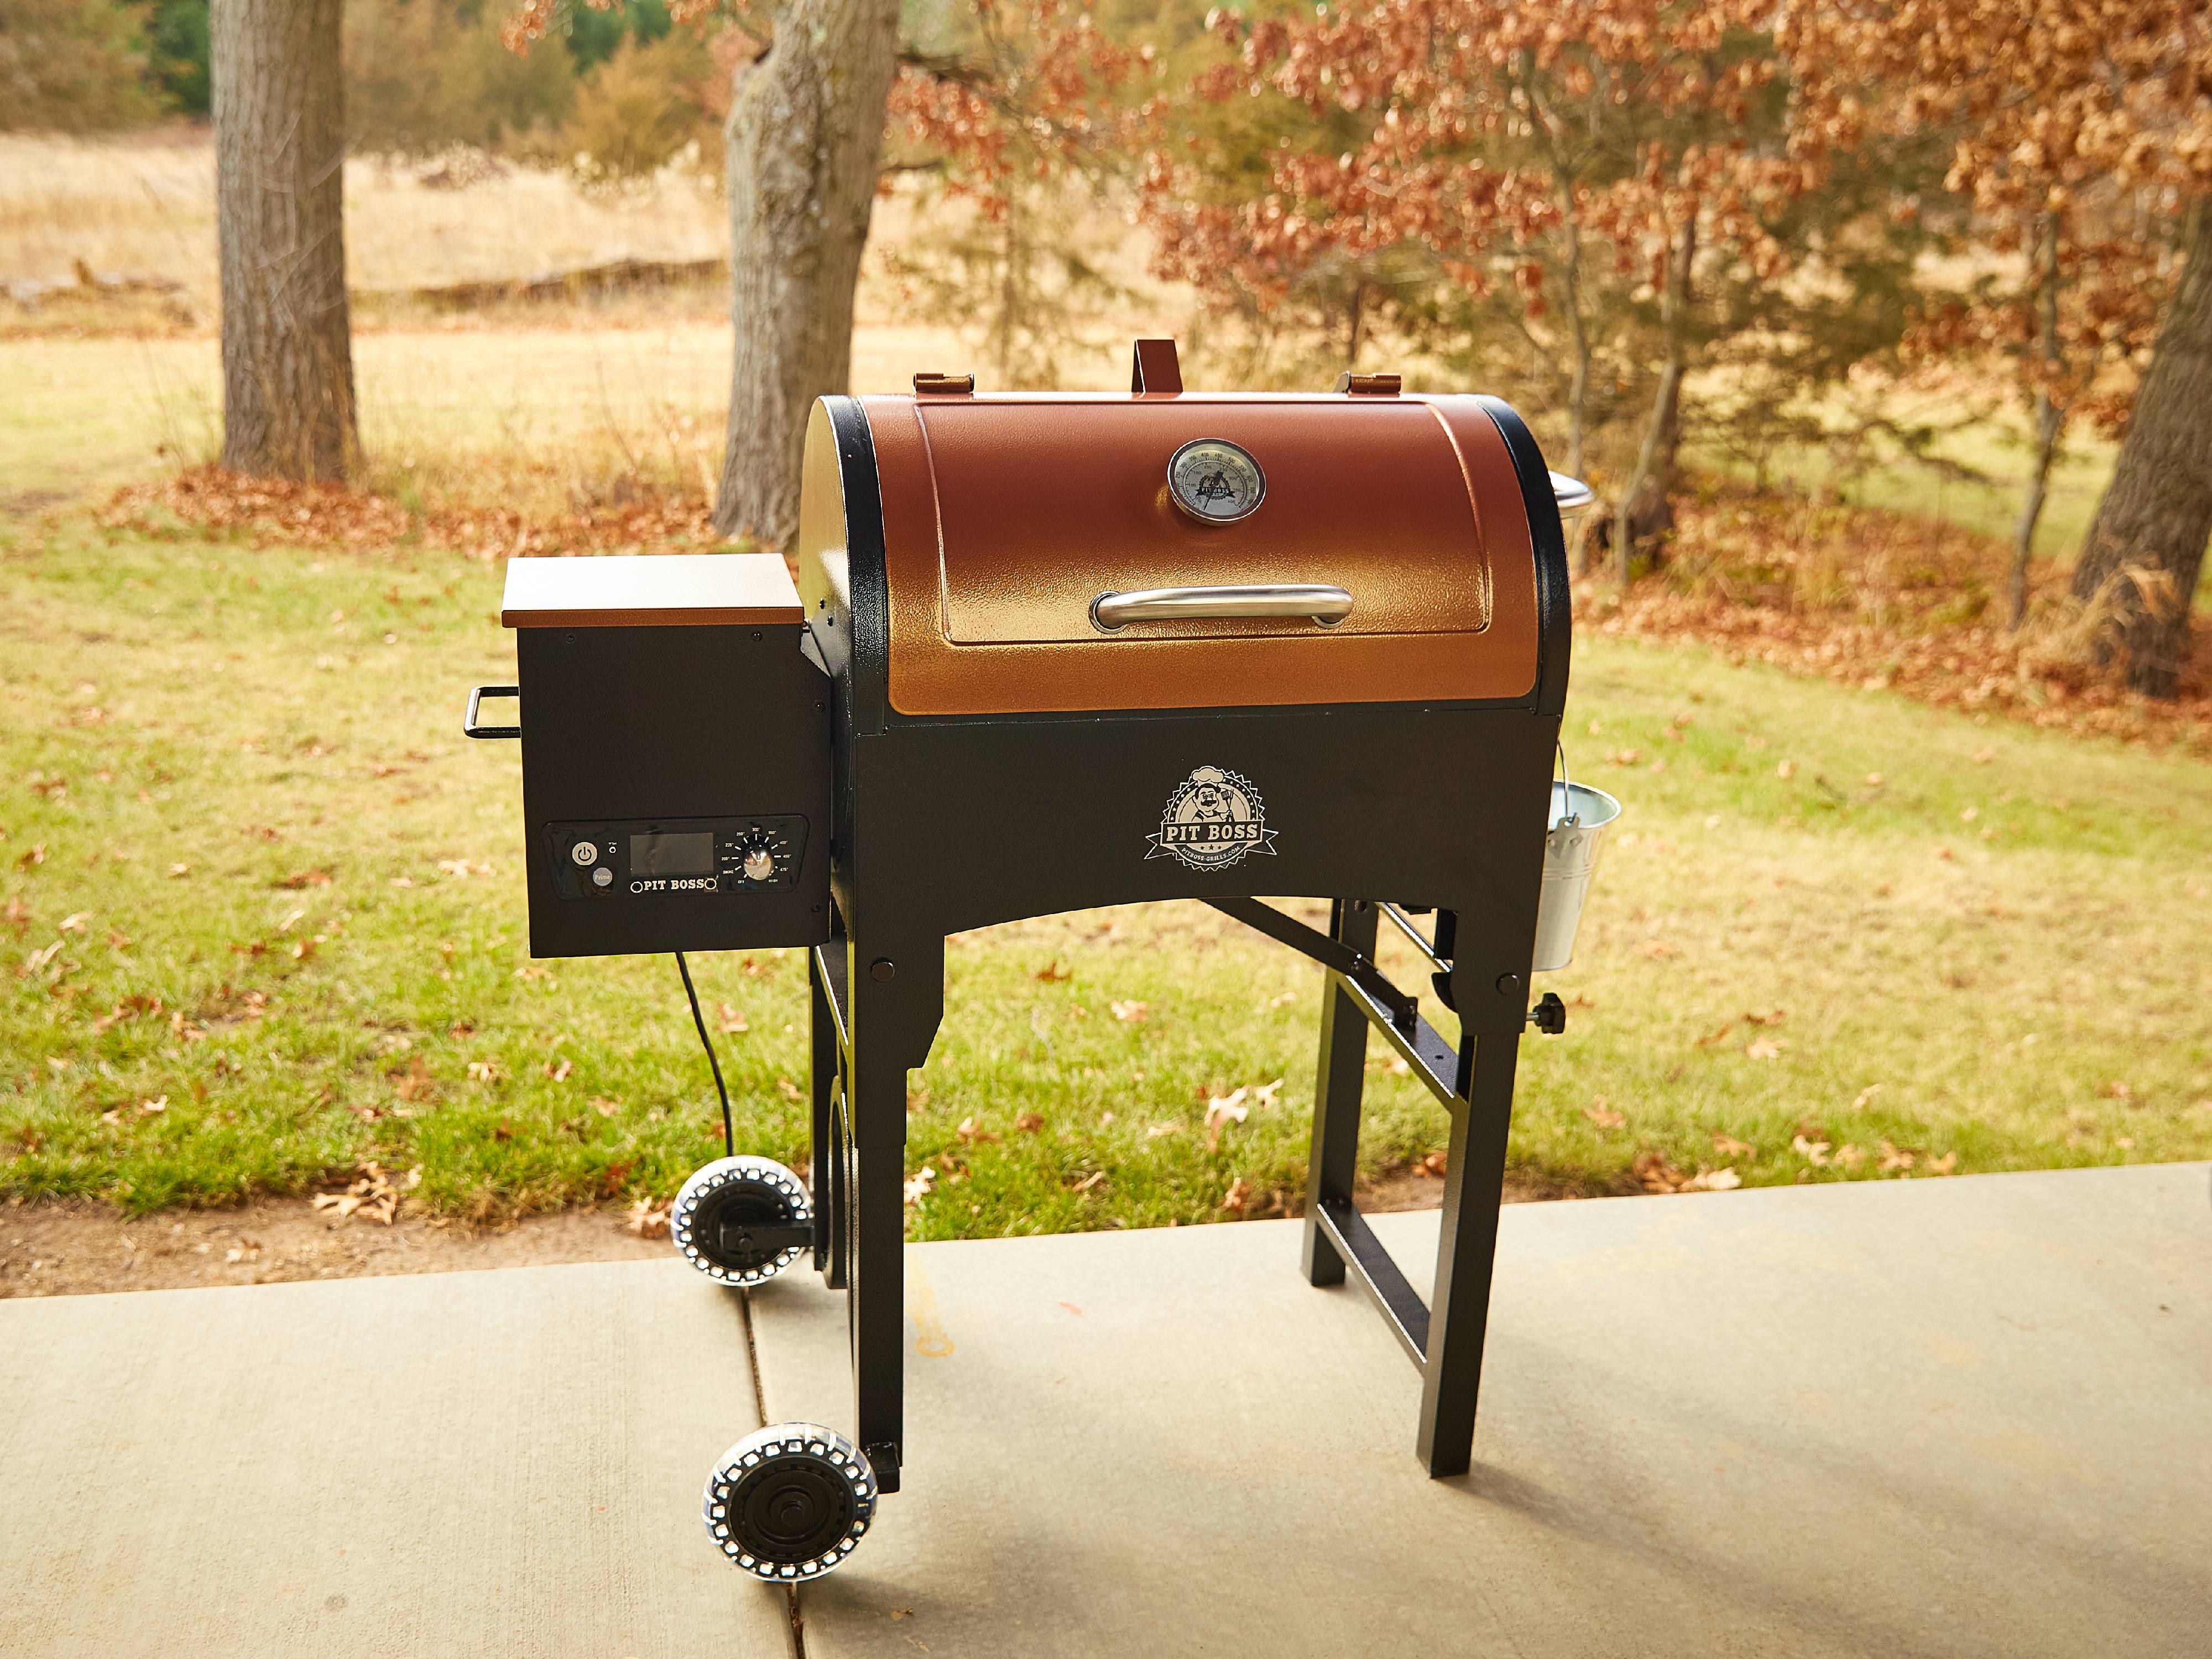 Pit Boss 340 Sq. in. Portable Tailgate, Camp Pellet Grill with Folding Legs - image 7 of 10